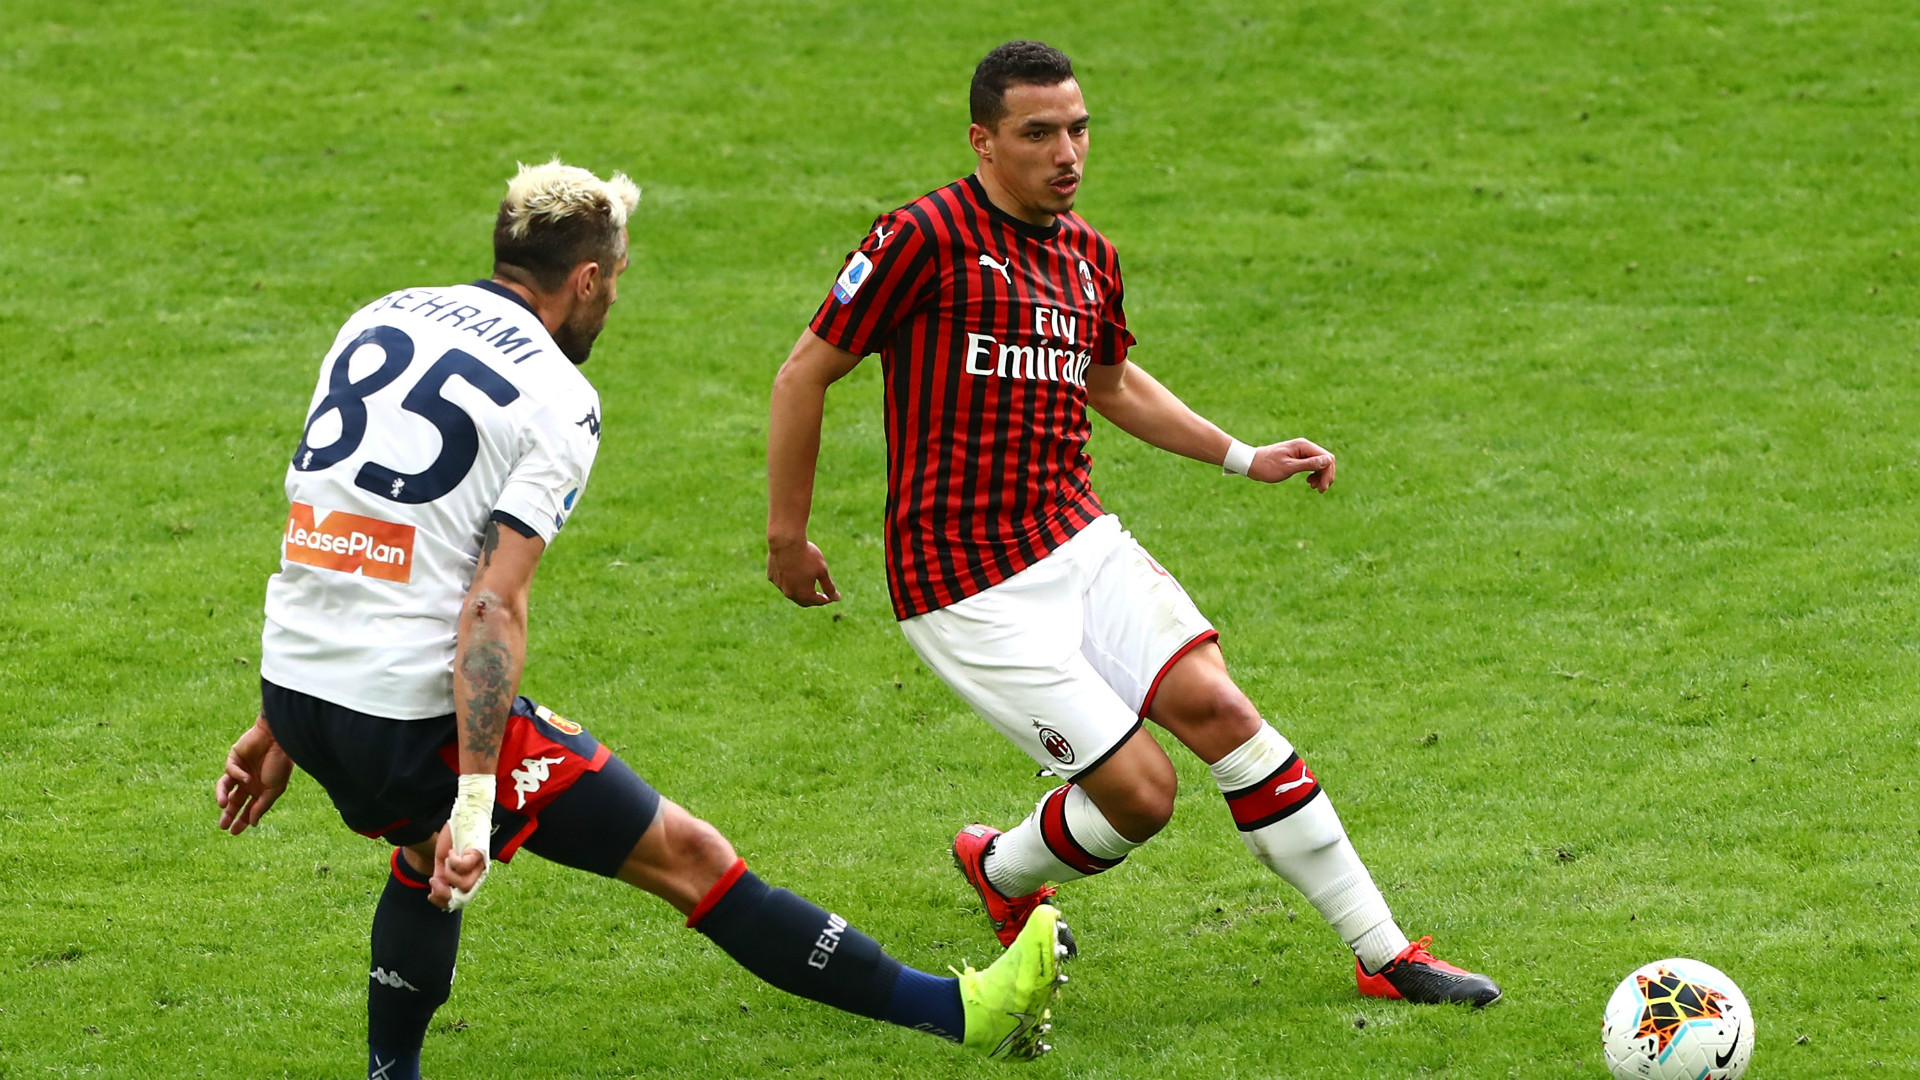 ‘You are at the heart of everything’ - Bennacer on playing Pirlo’s Regista role at AC Milan